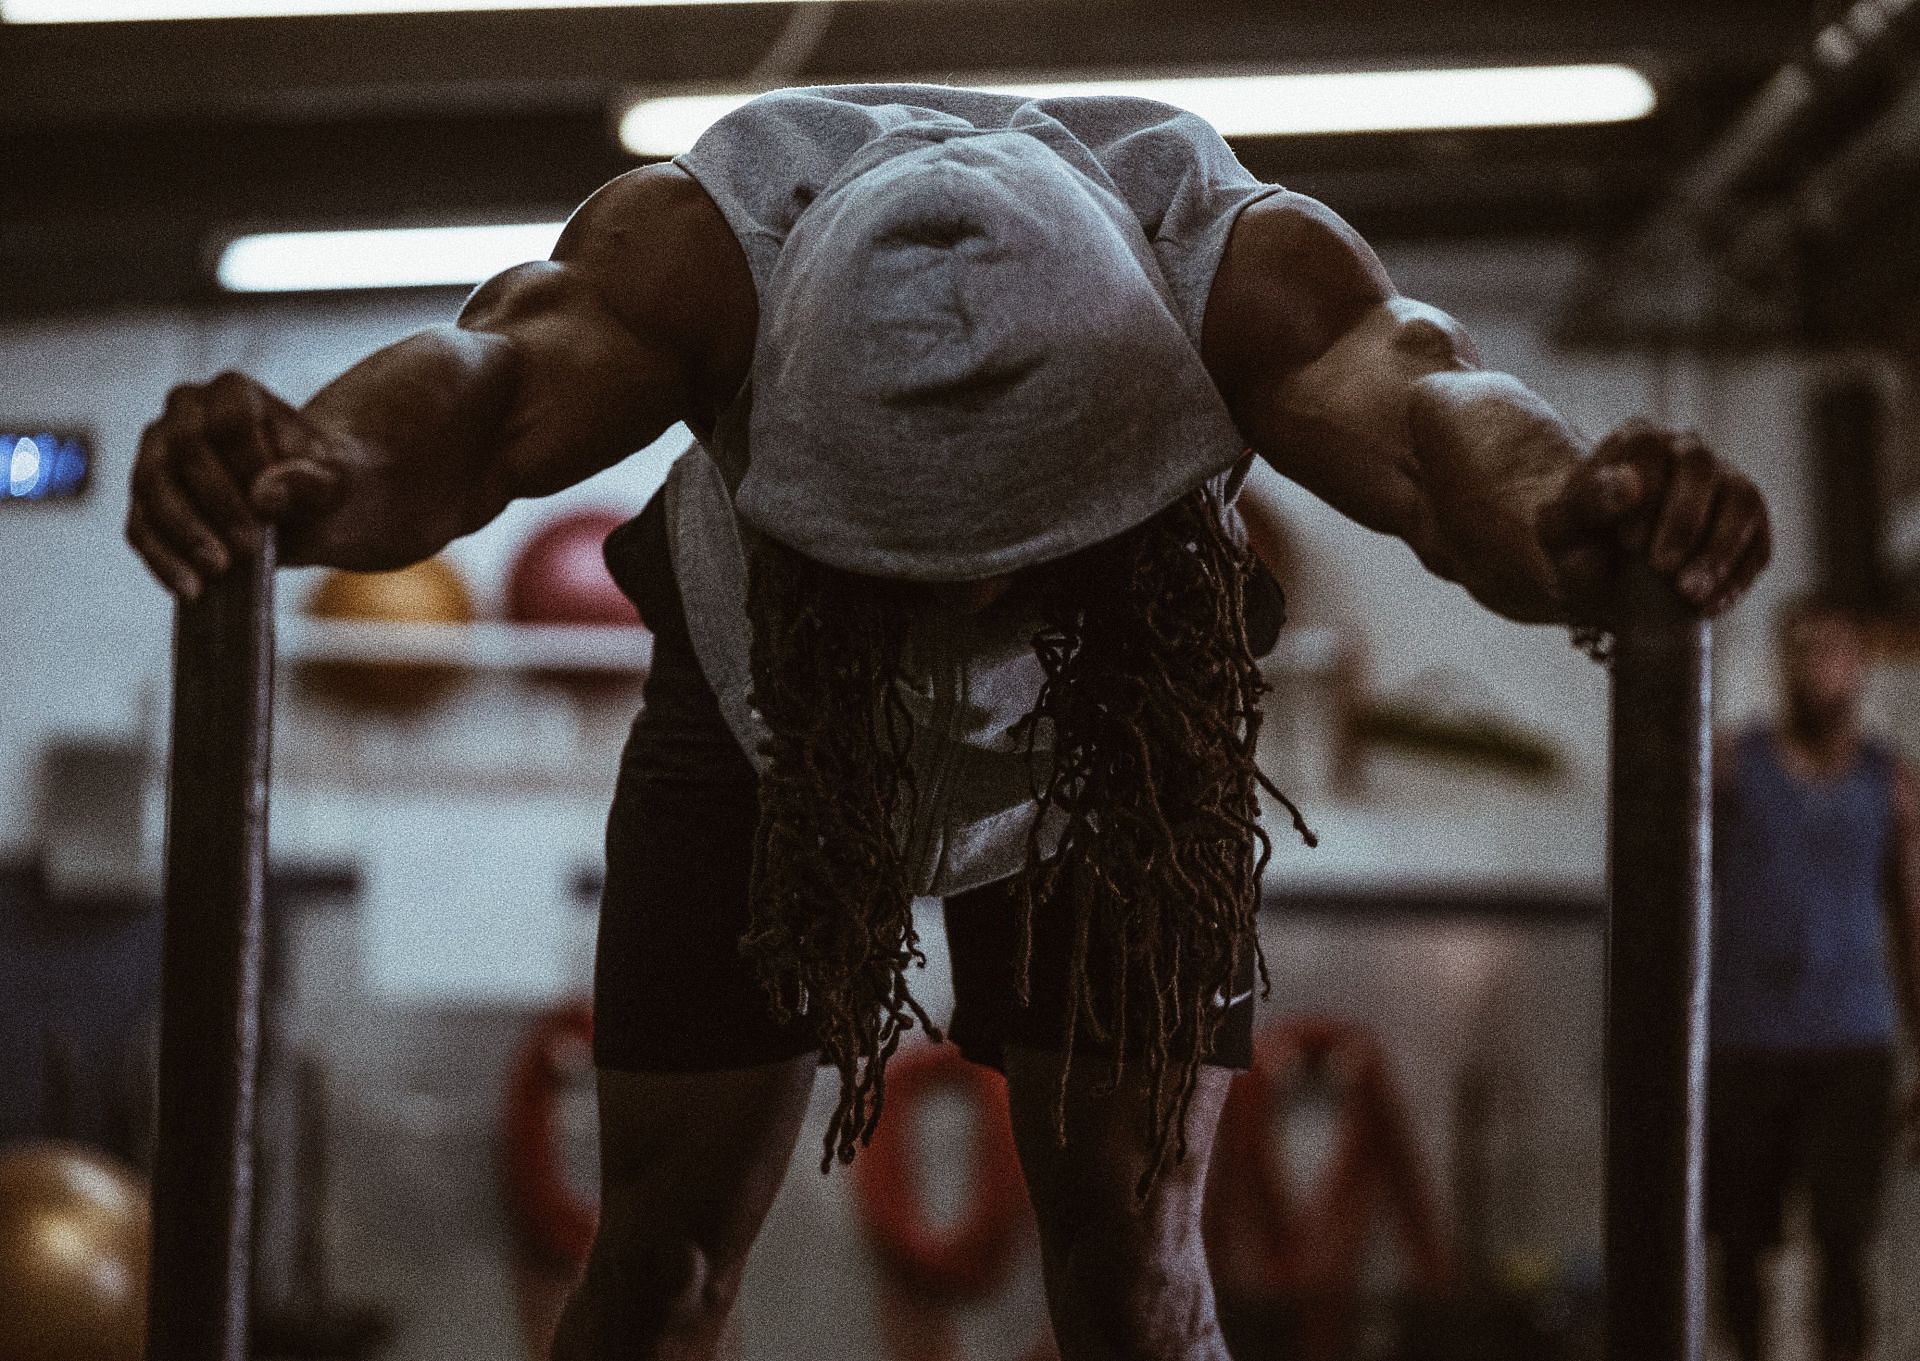 Here are some exercises to improve your functional strength. (Image via unsplash/Kyle Johnson)